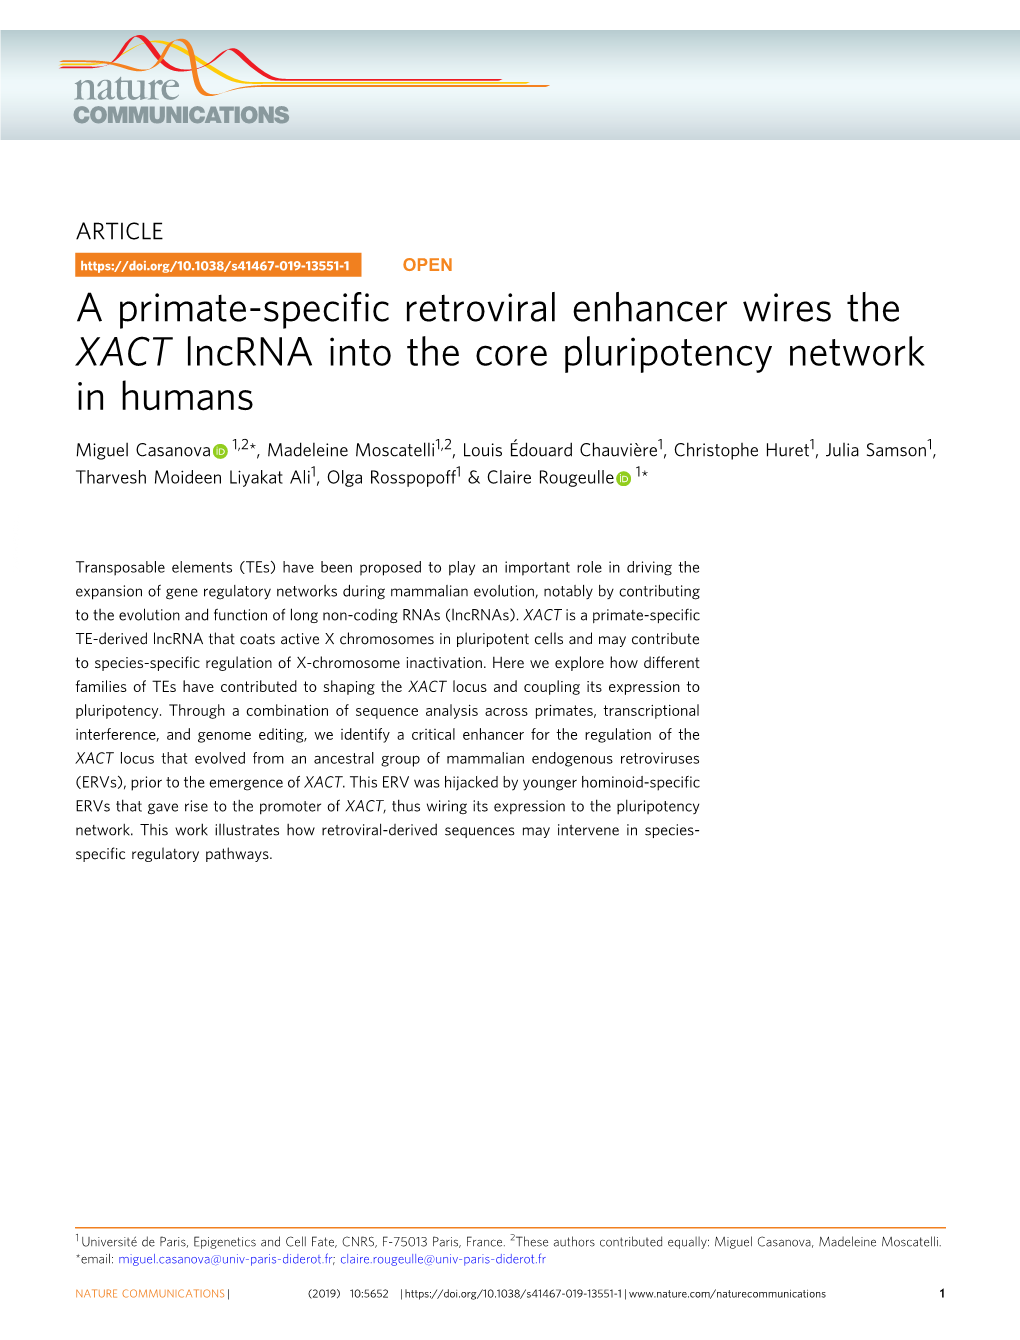 A Primate-Specific Retroviral Enhancer Wires the XACT Lncrna